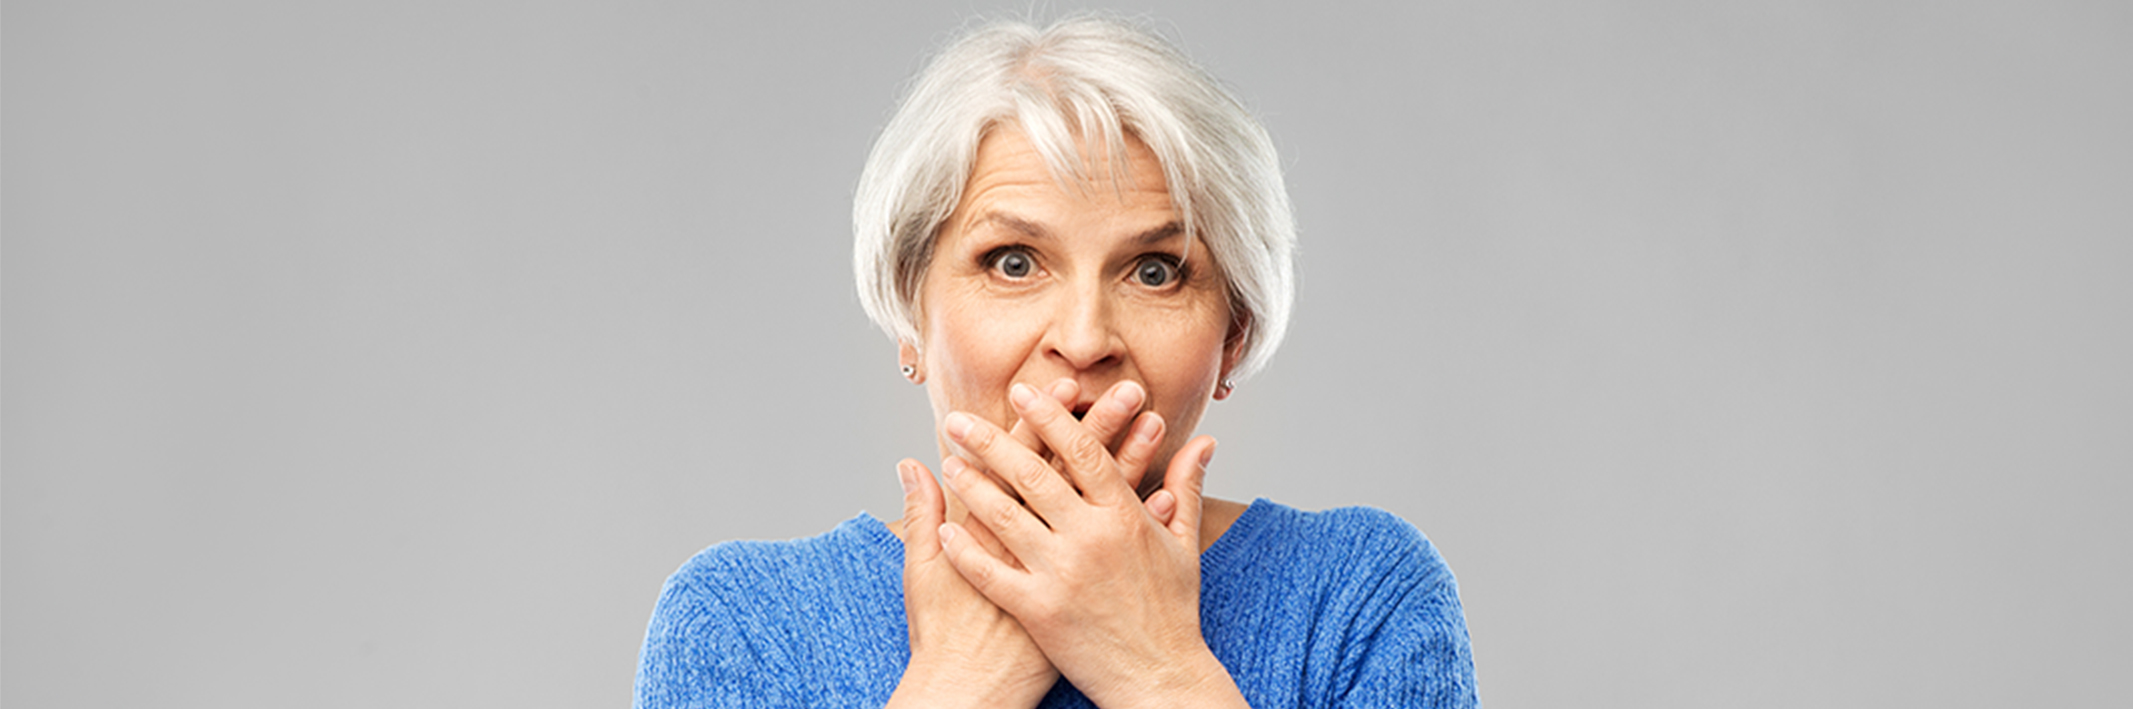 Ageing and Tooth Loss: What You Should Know